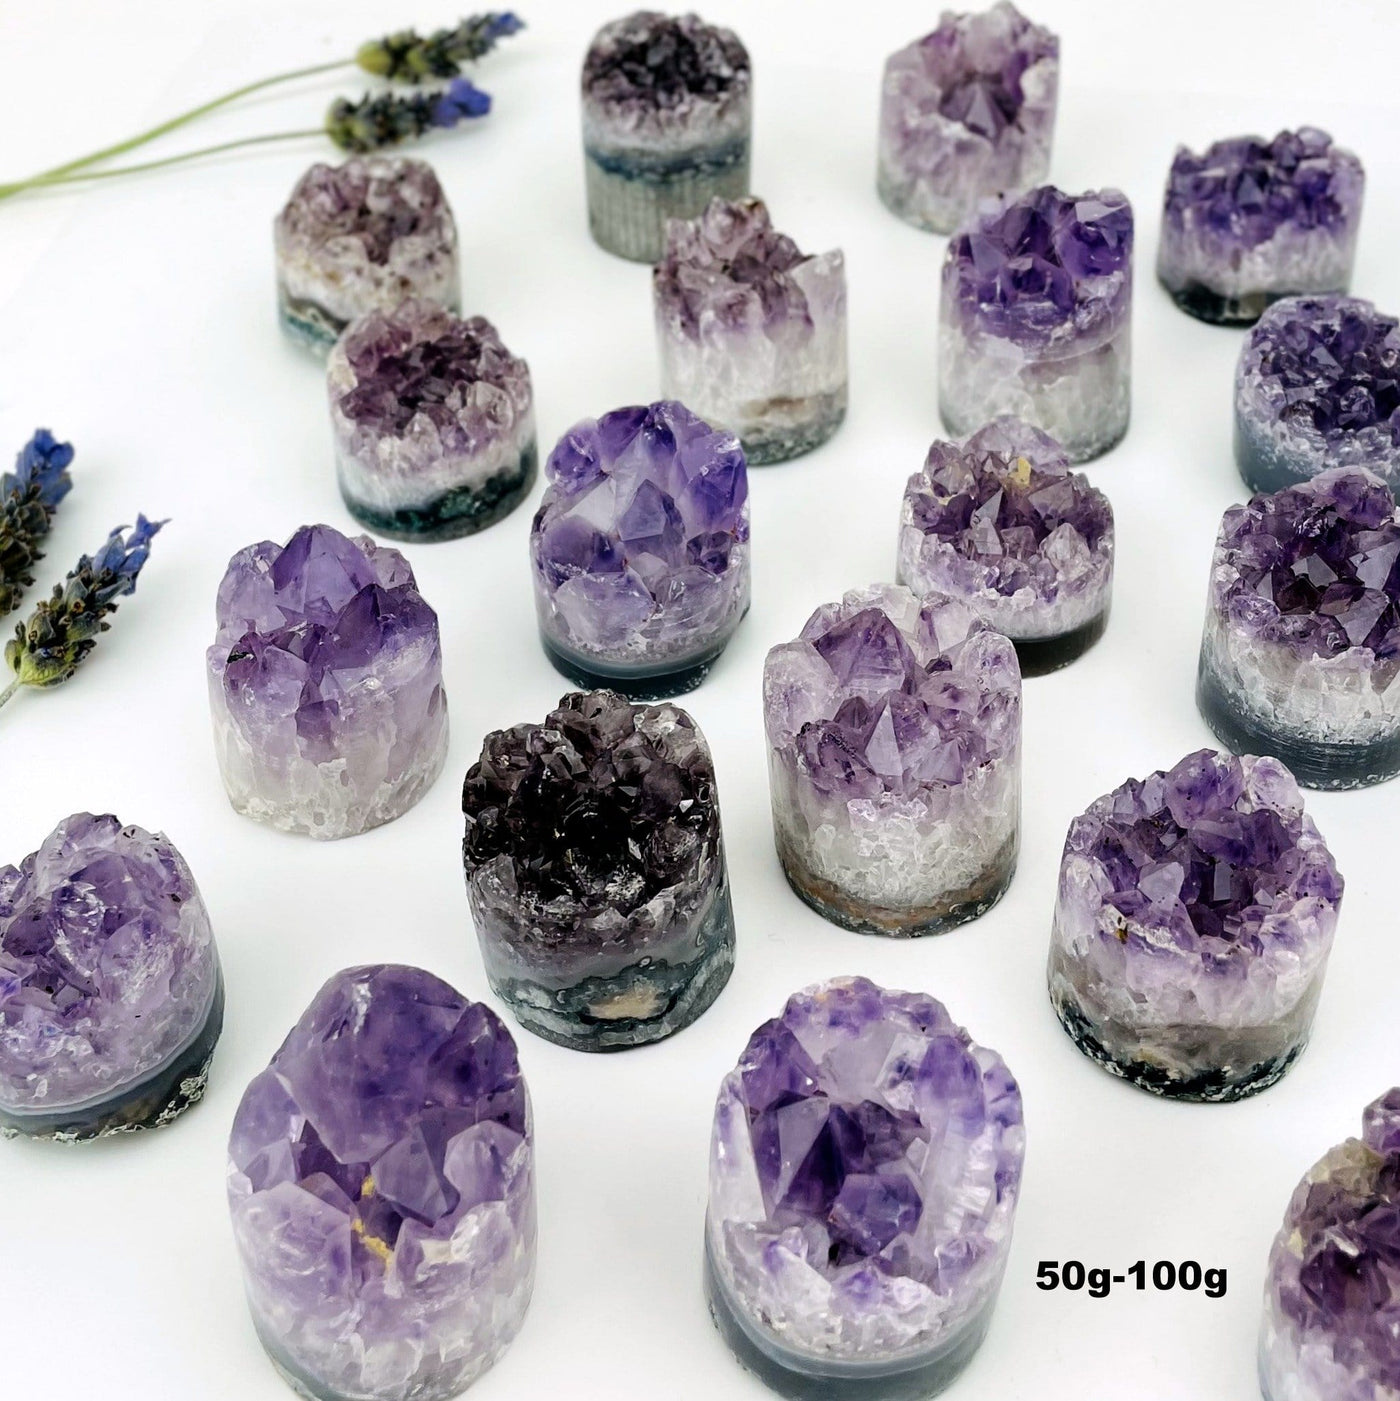 A variety of size 50gram - 100gram amethyst cores on a white background.